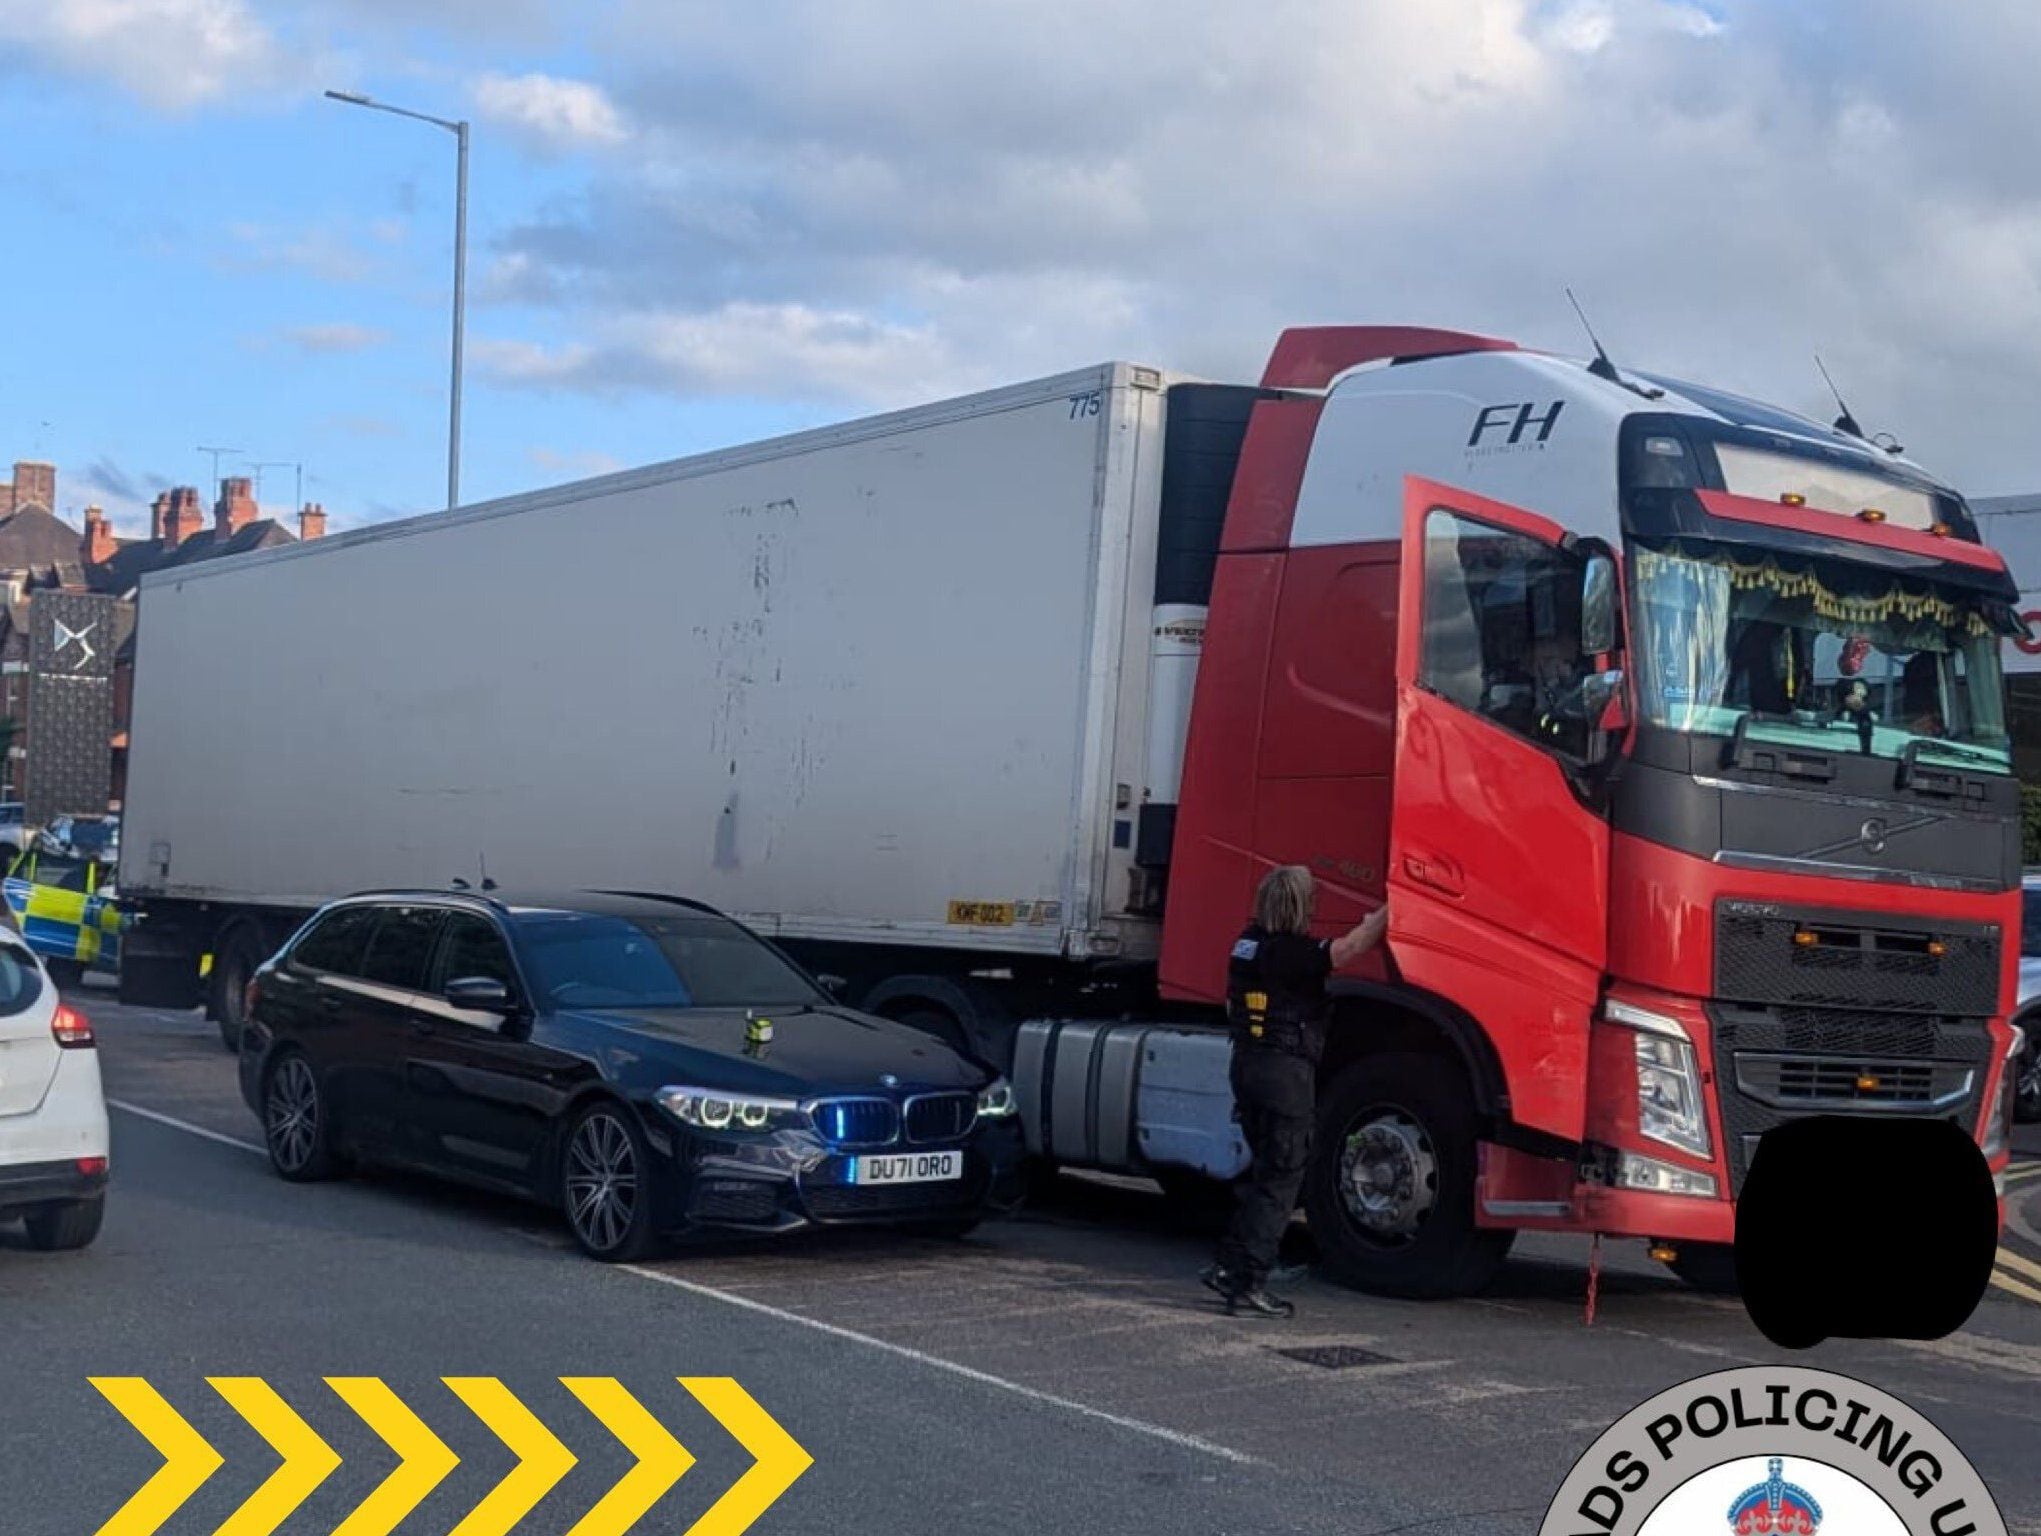 Lorry driver found to be drunk after crashing into multiple vehicles